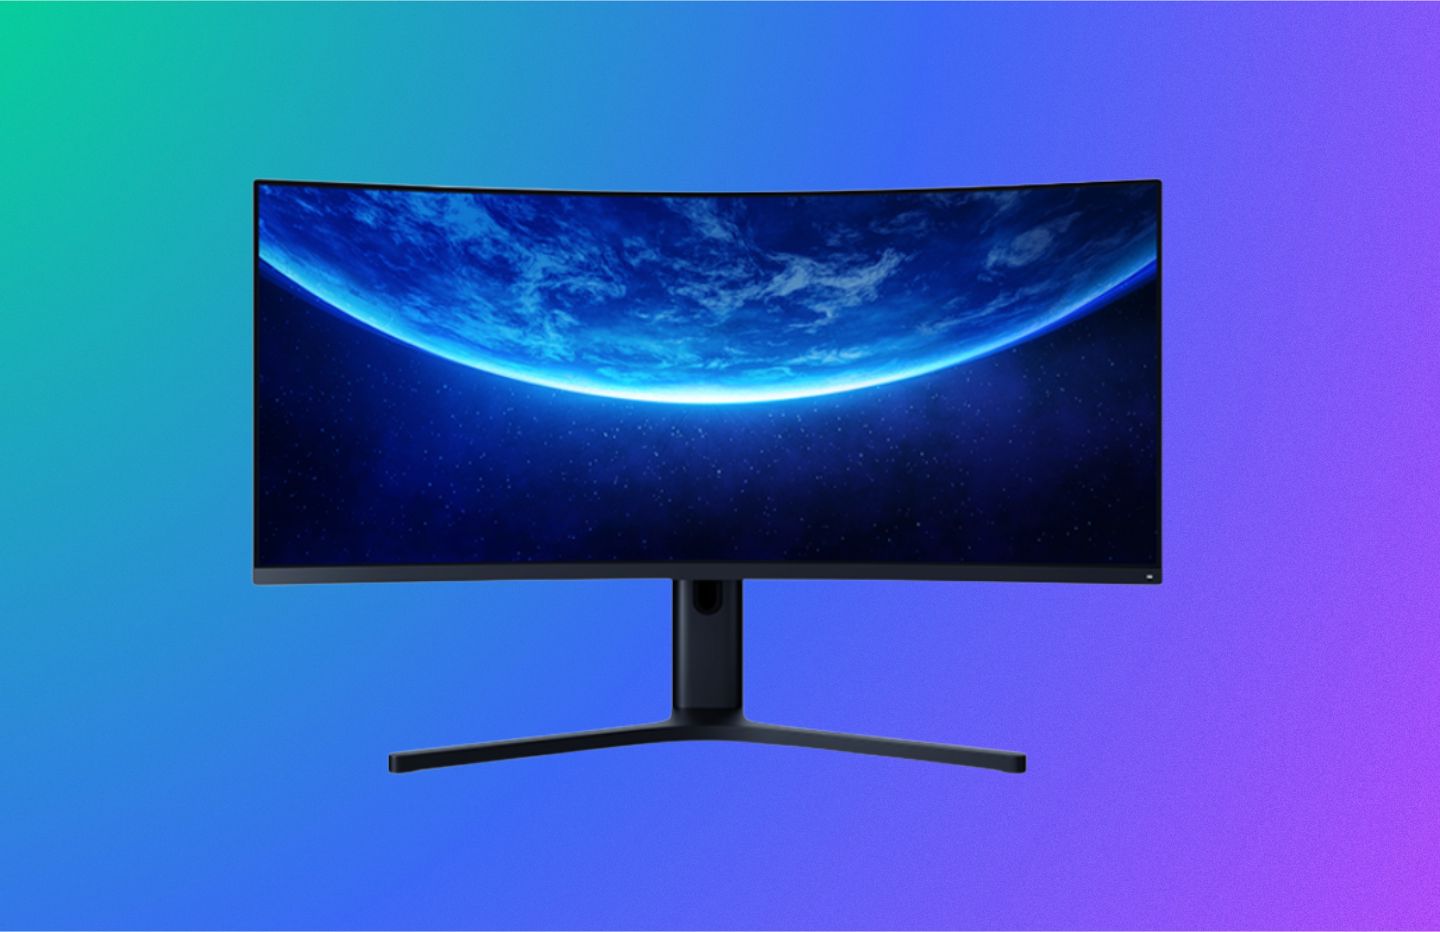 https://images.frandroid.com/wp-content/uploads/2022/12/xiaomi-mi-curved-gaming-monitor-34-1.jpg